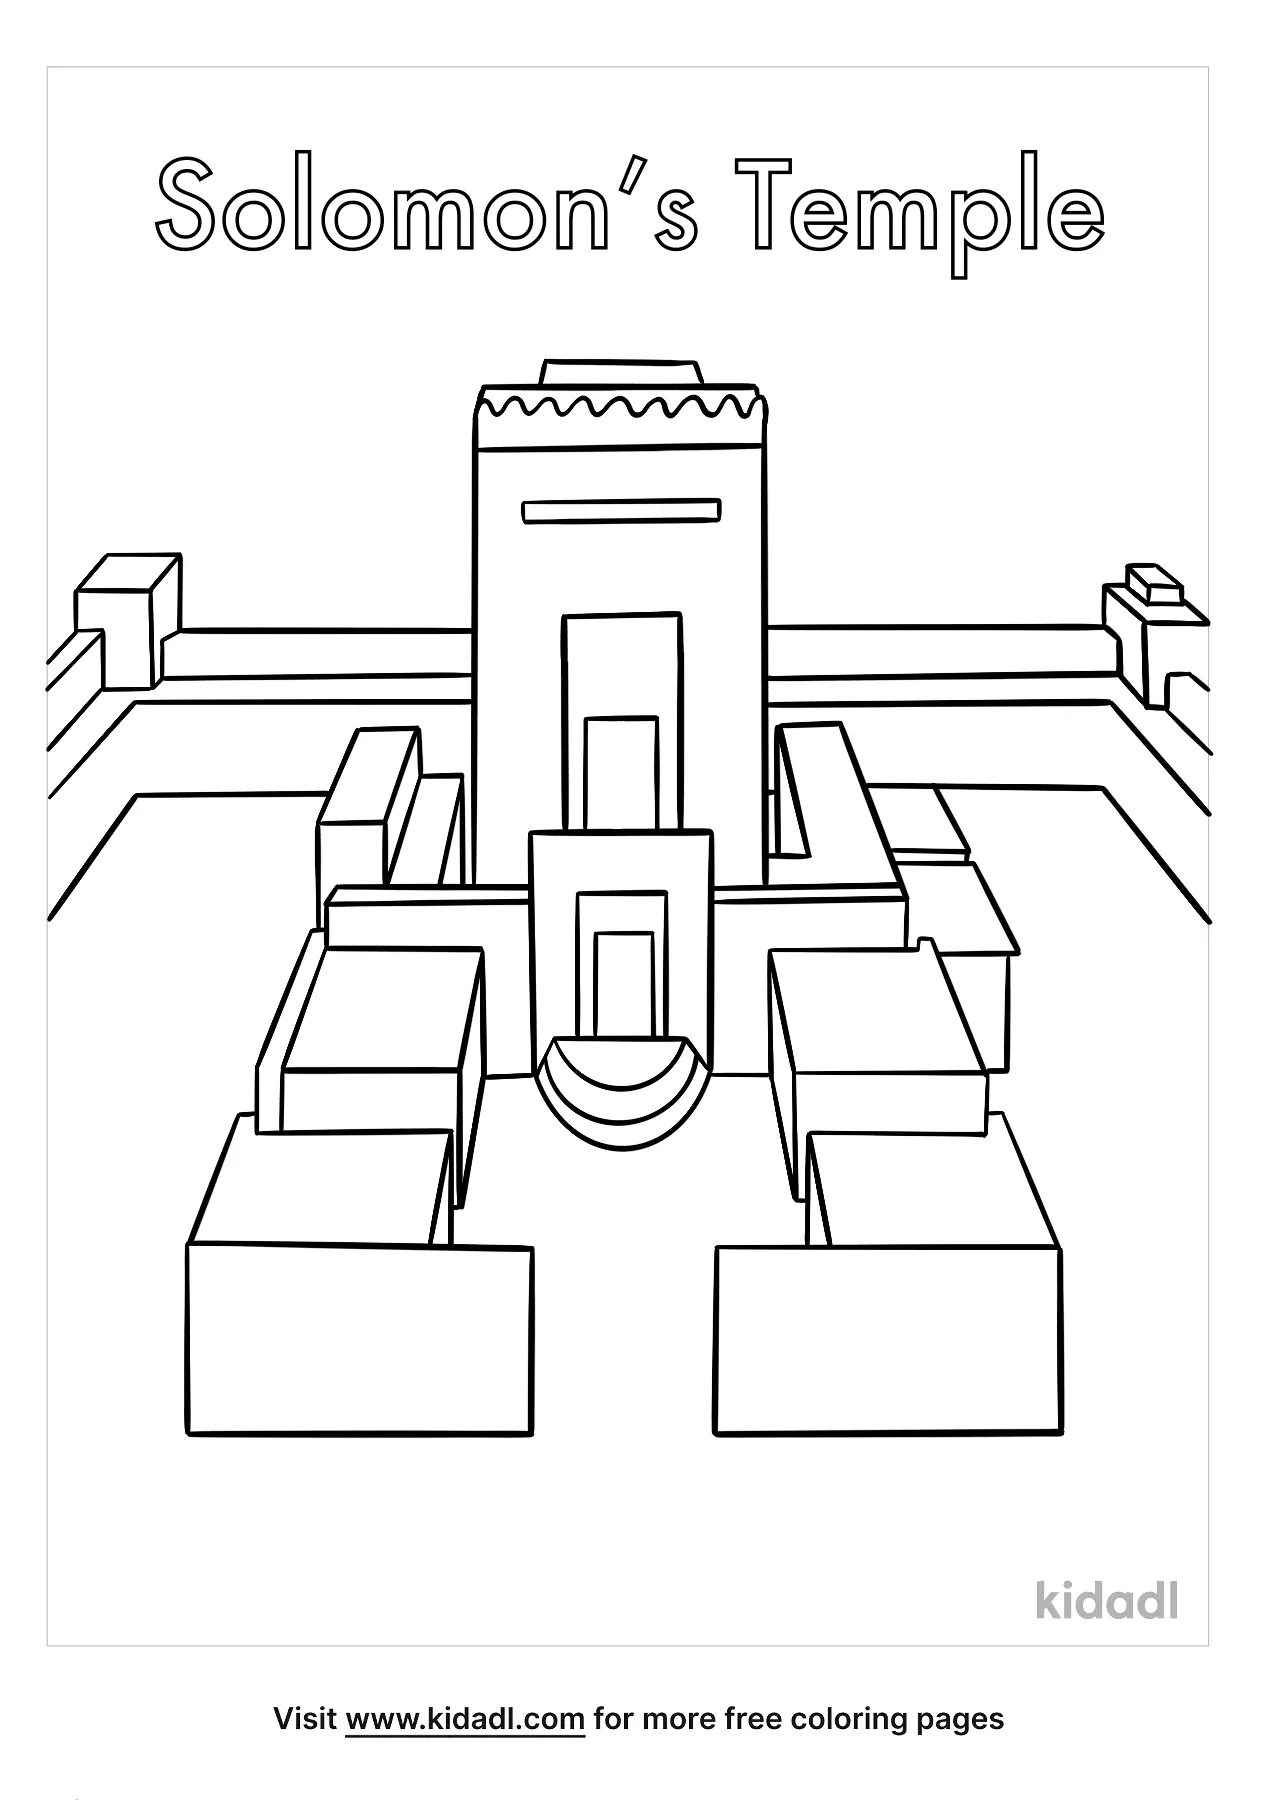 Free solomons temple coloring page coloring page printables